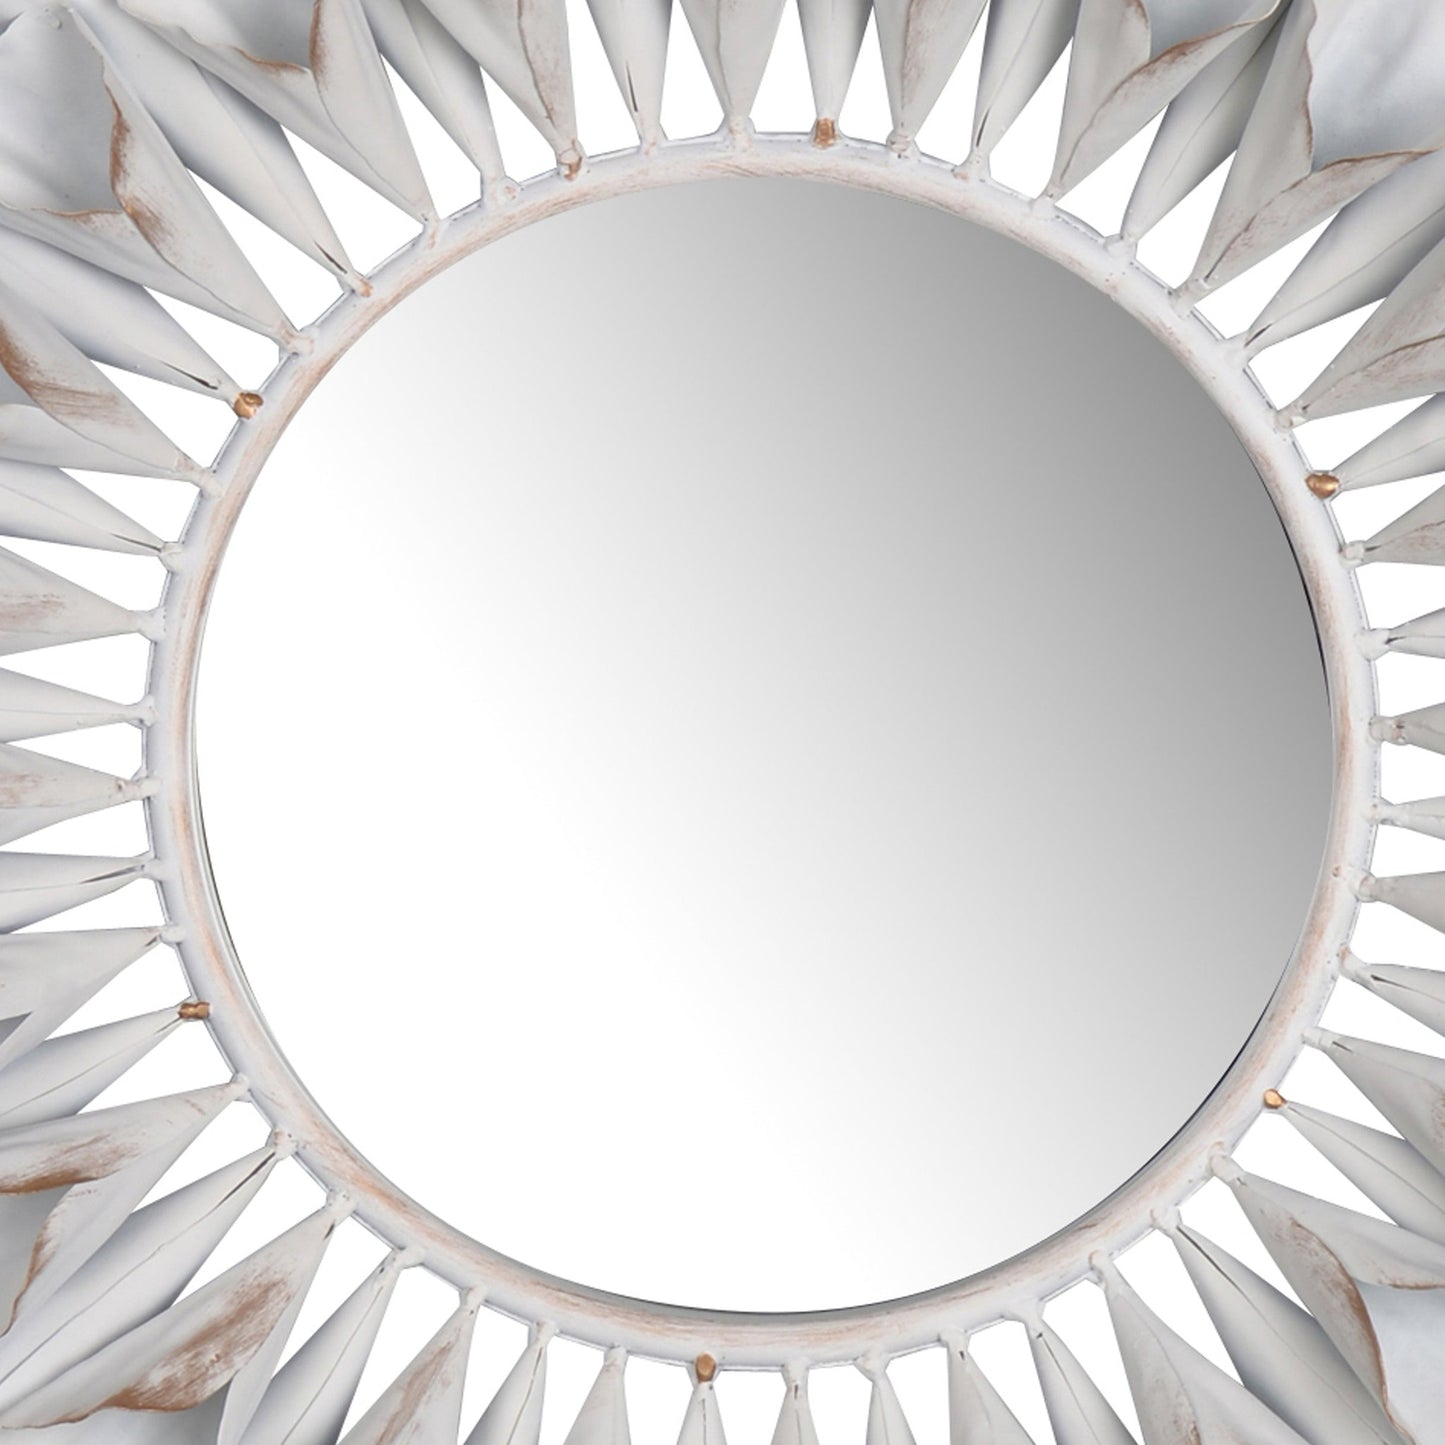 Benzara 24" White and Clear Decorative Metal Wall Mirror With Floral Accents